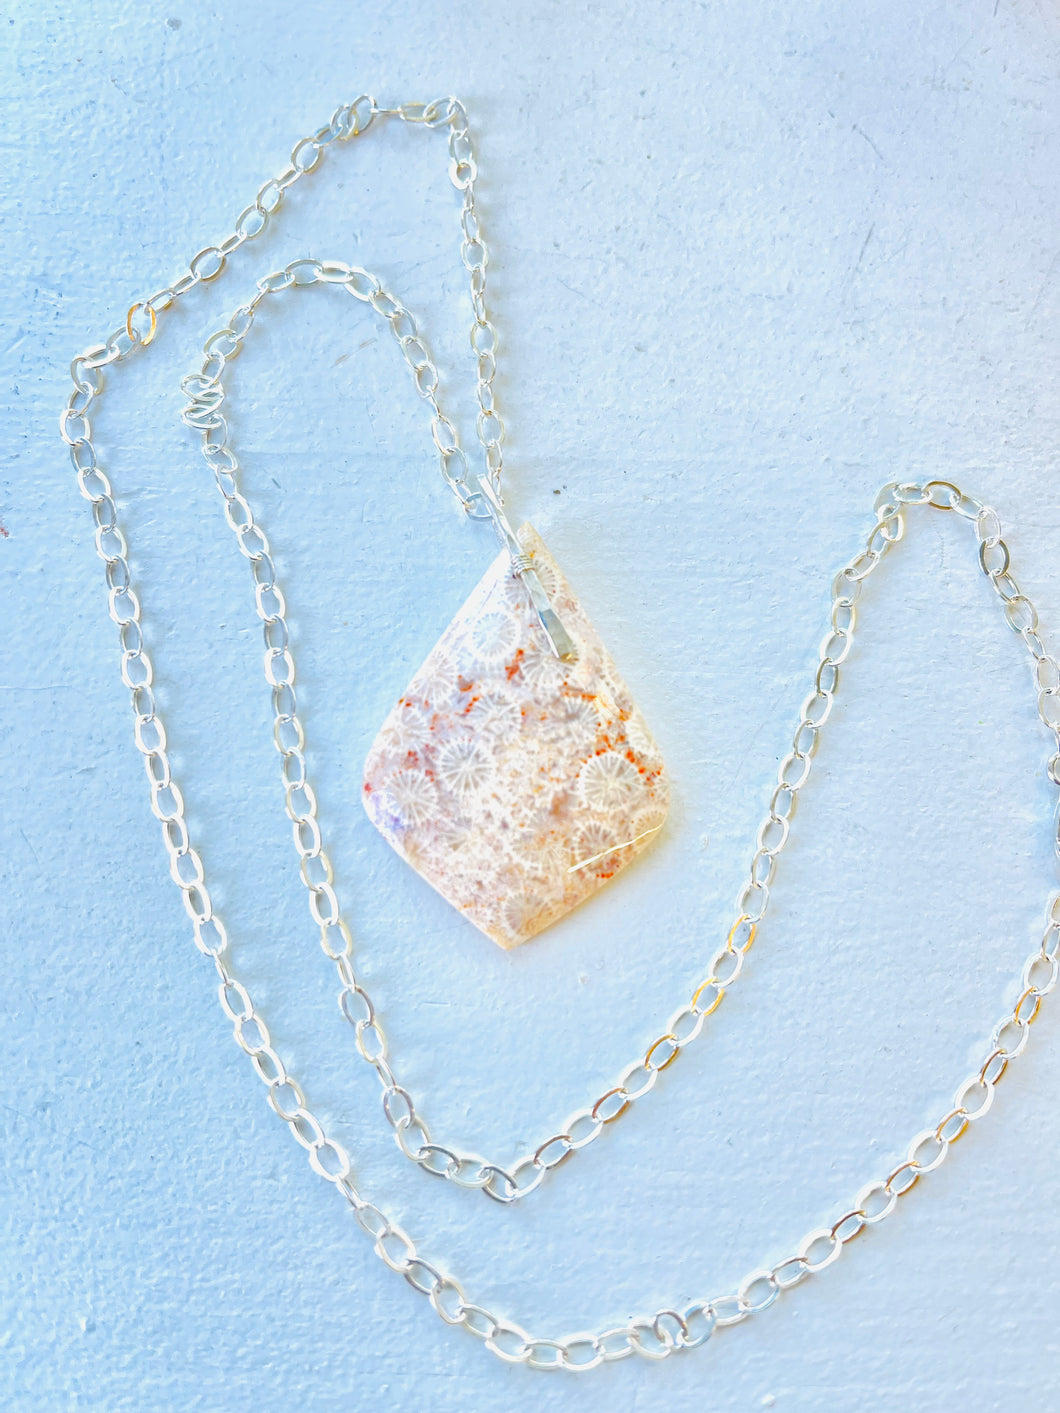 Pendant with beautiful fossil light beige color